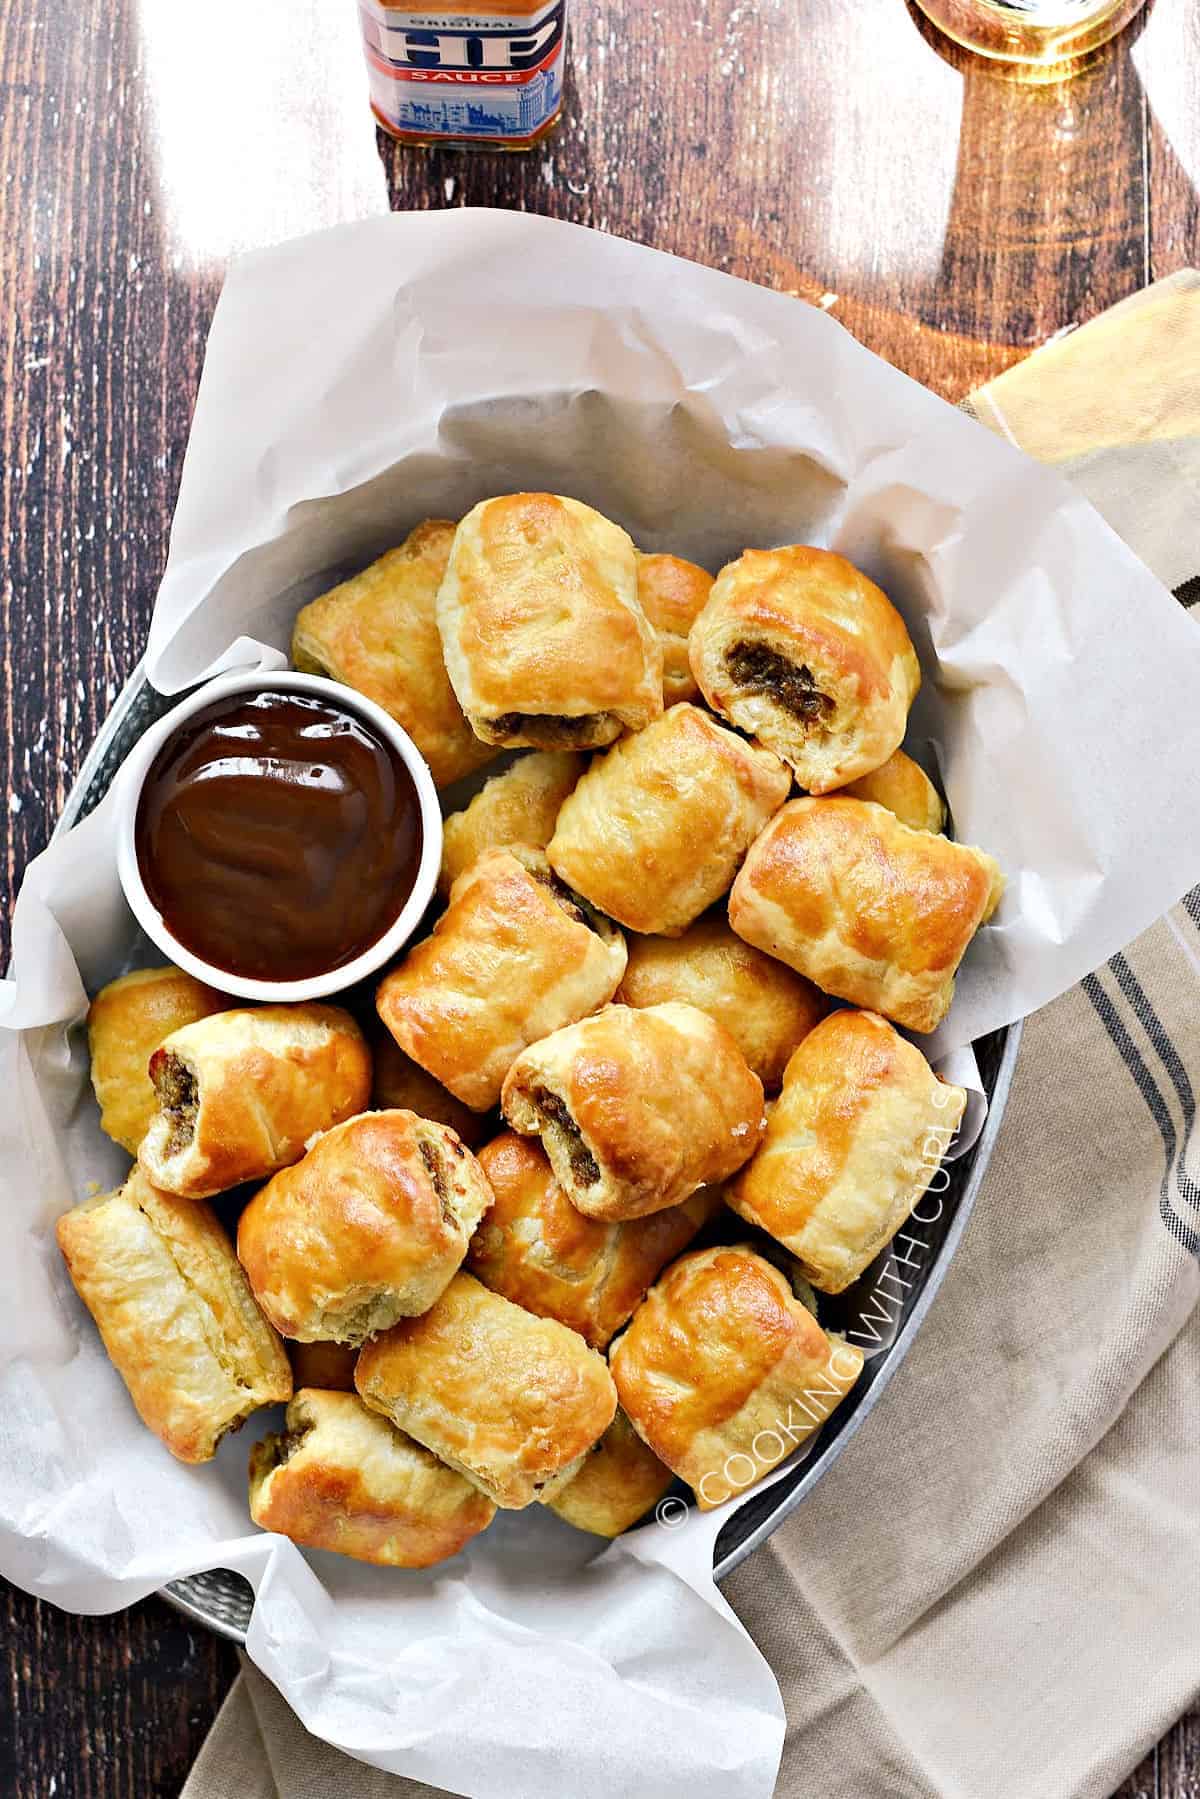 Looking down on a pile of puff pastry sausage rolls in a parchment paper lined basket with dipping sauce in a bowl on the left side.